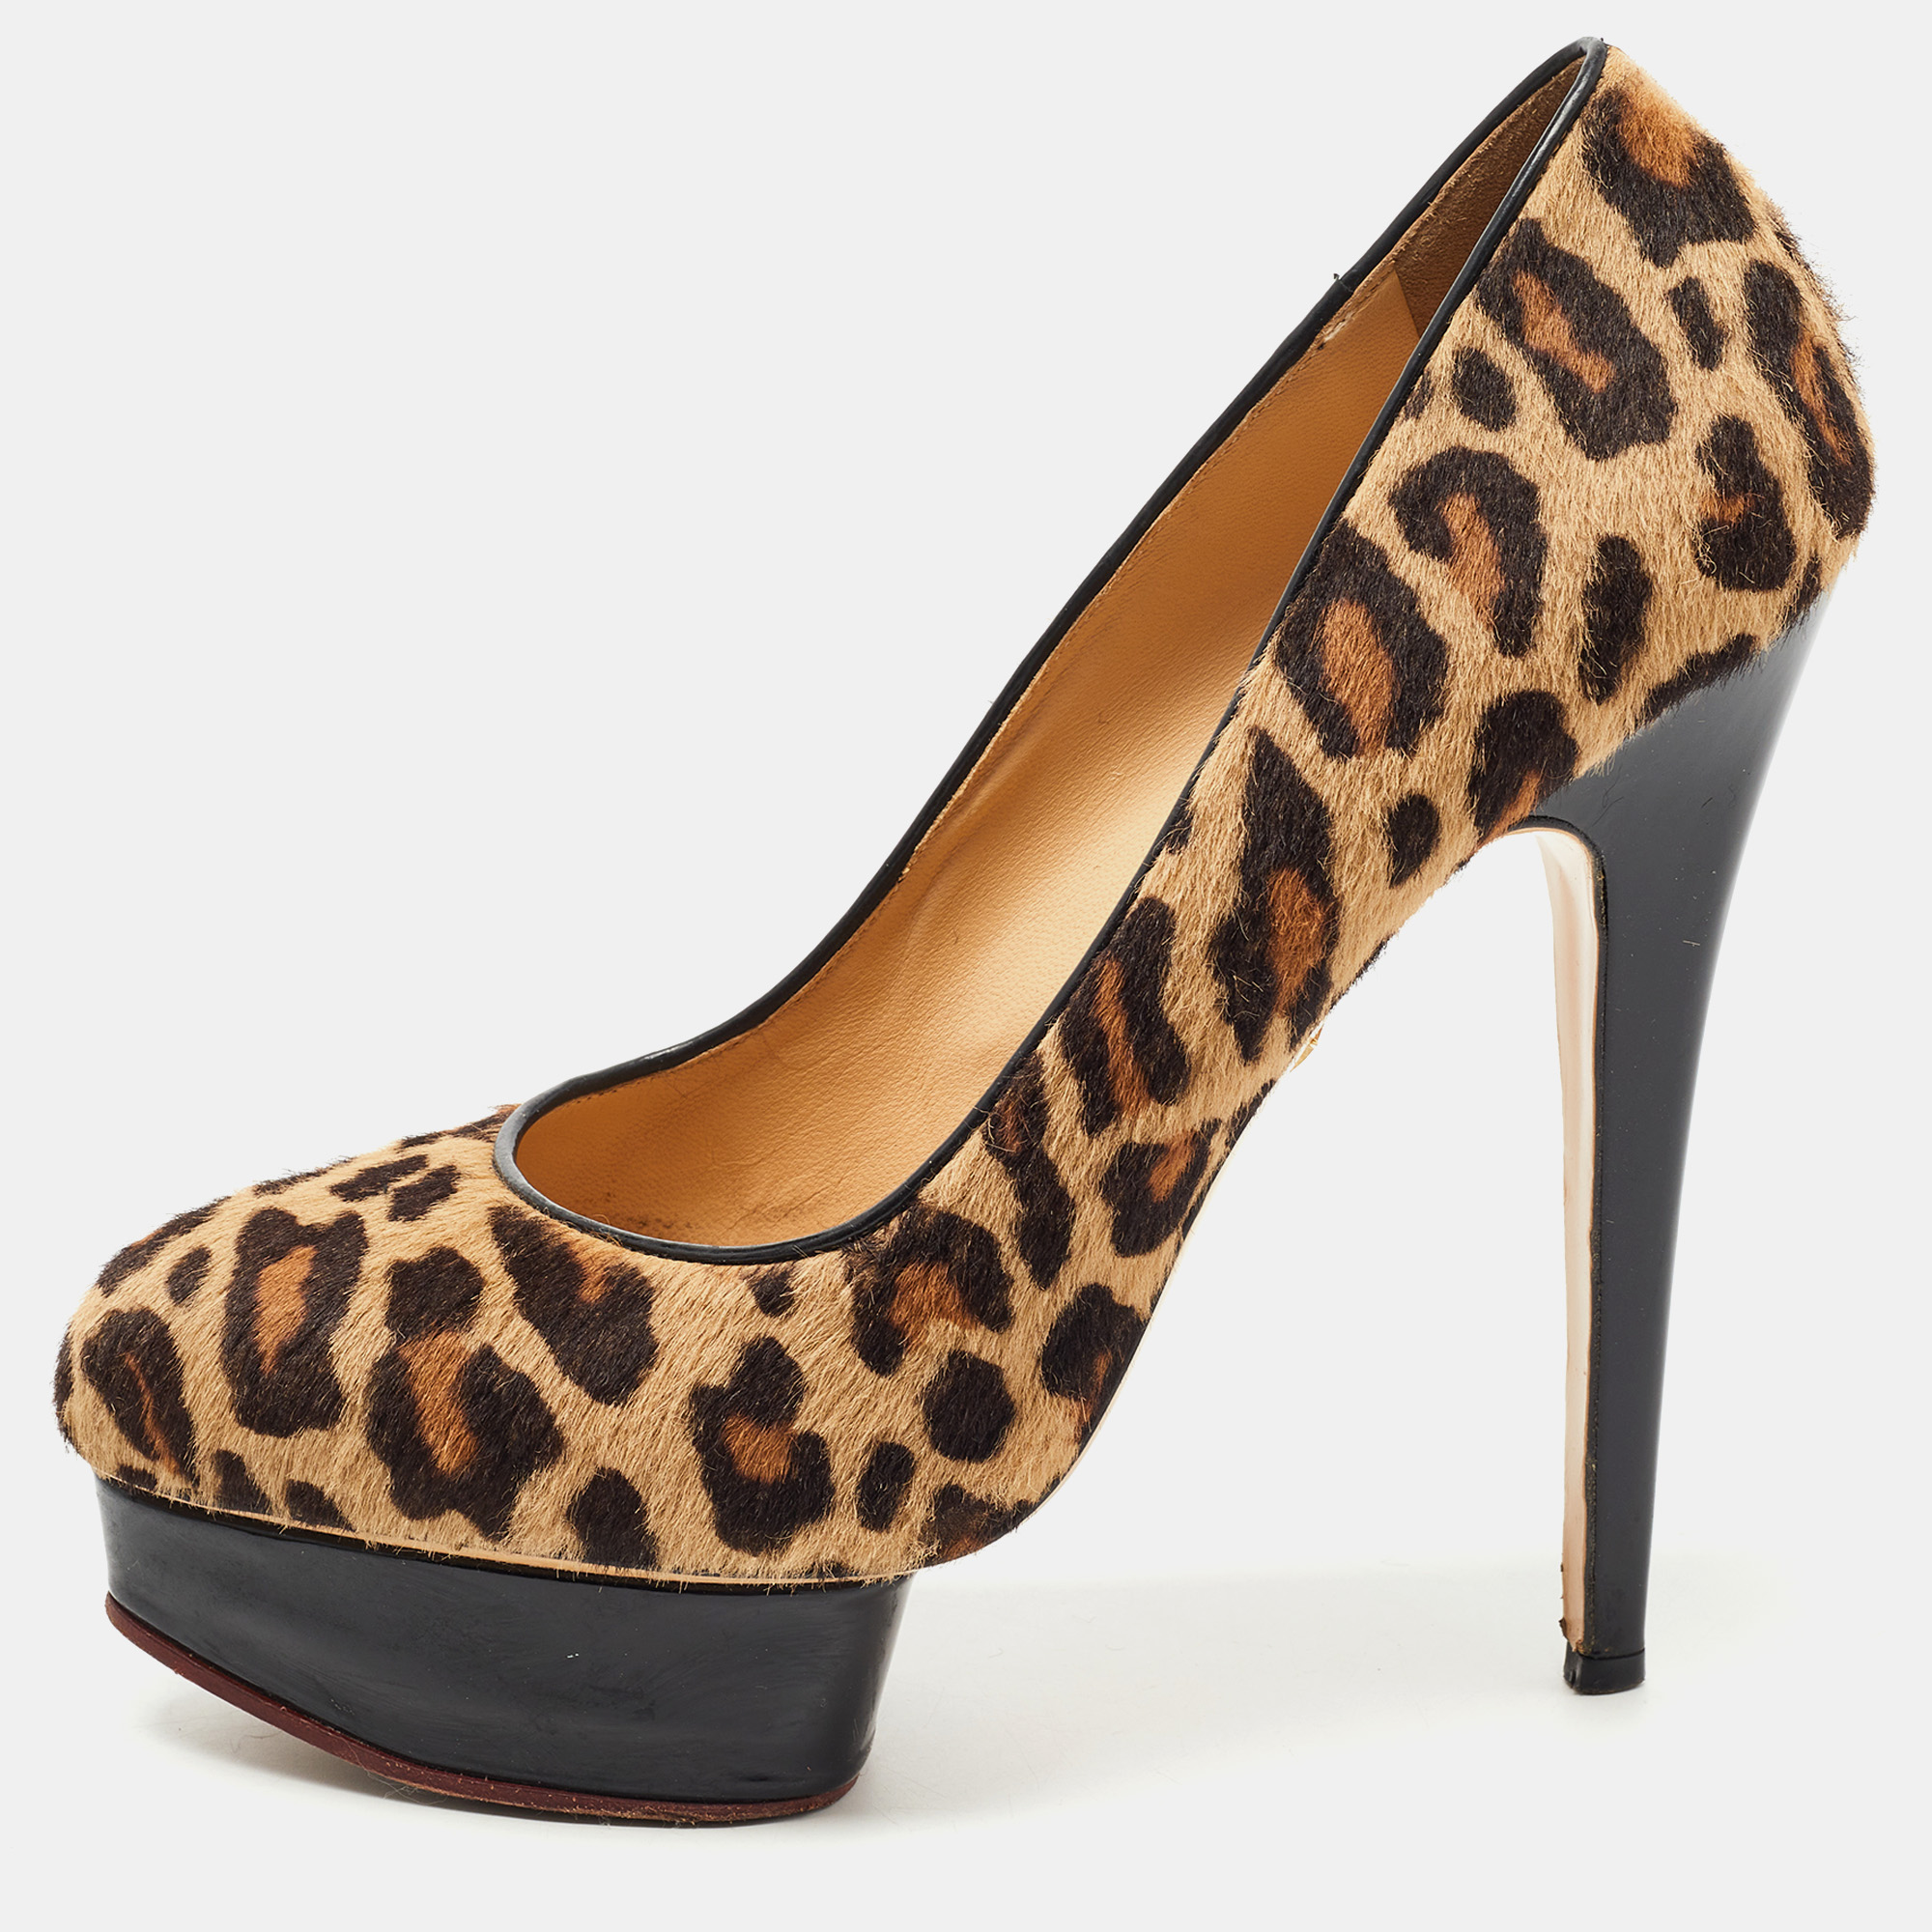 Pre-owned Charlotte Olympia Brown/beige Leopard Print Calf Hair Dolly Platform Pumps Size 41